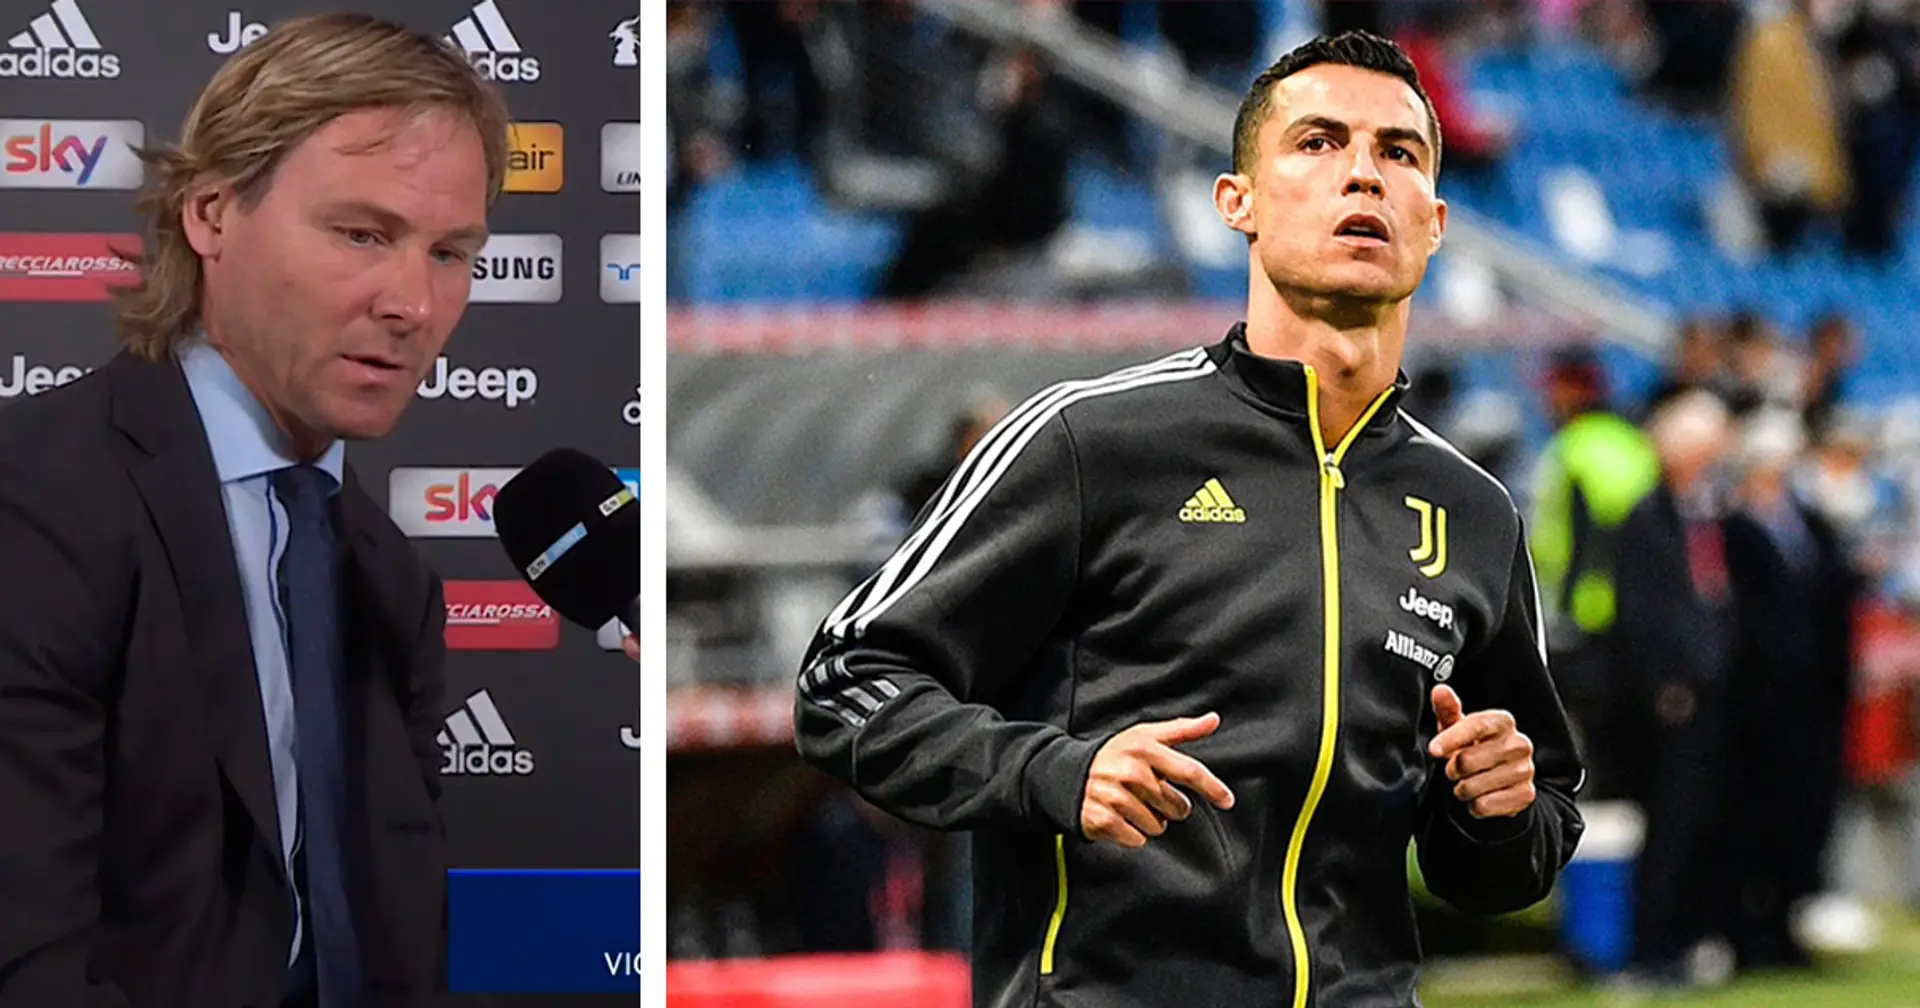 '100% will stay': Juve vice-president denies Ronaldo exit rumours